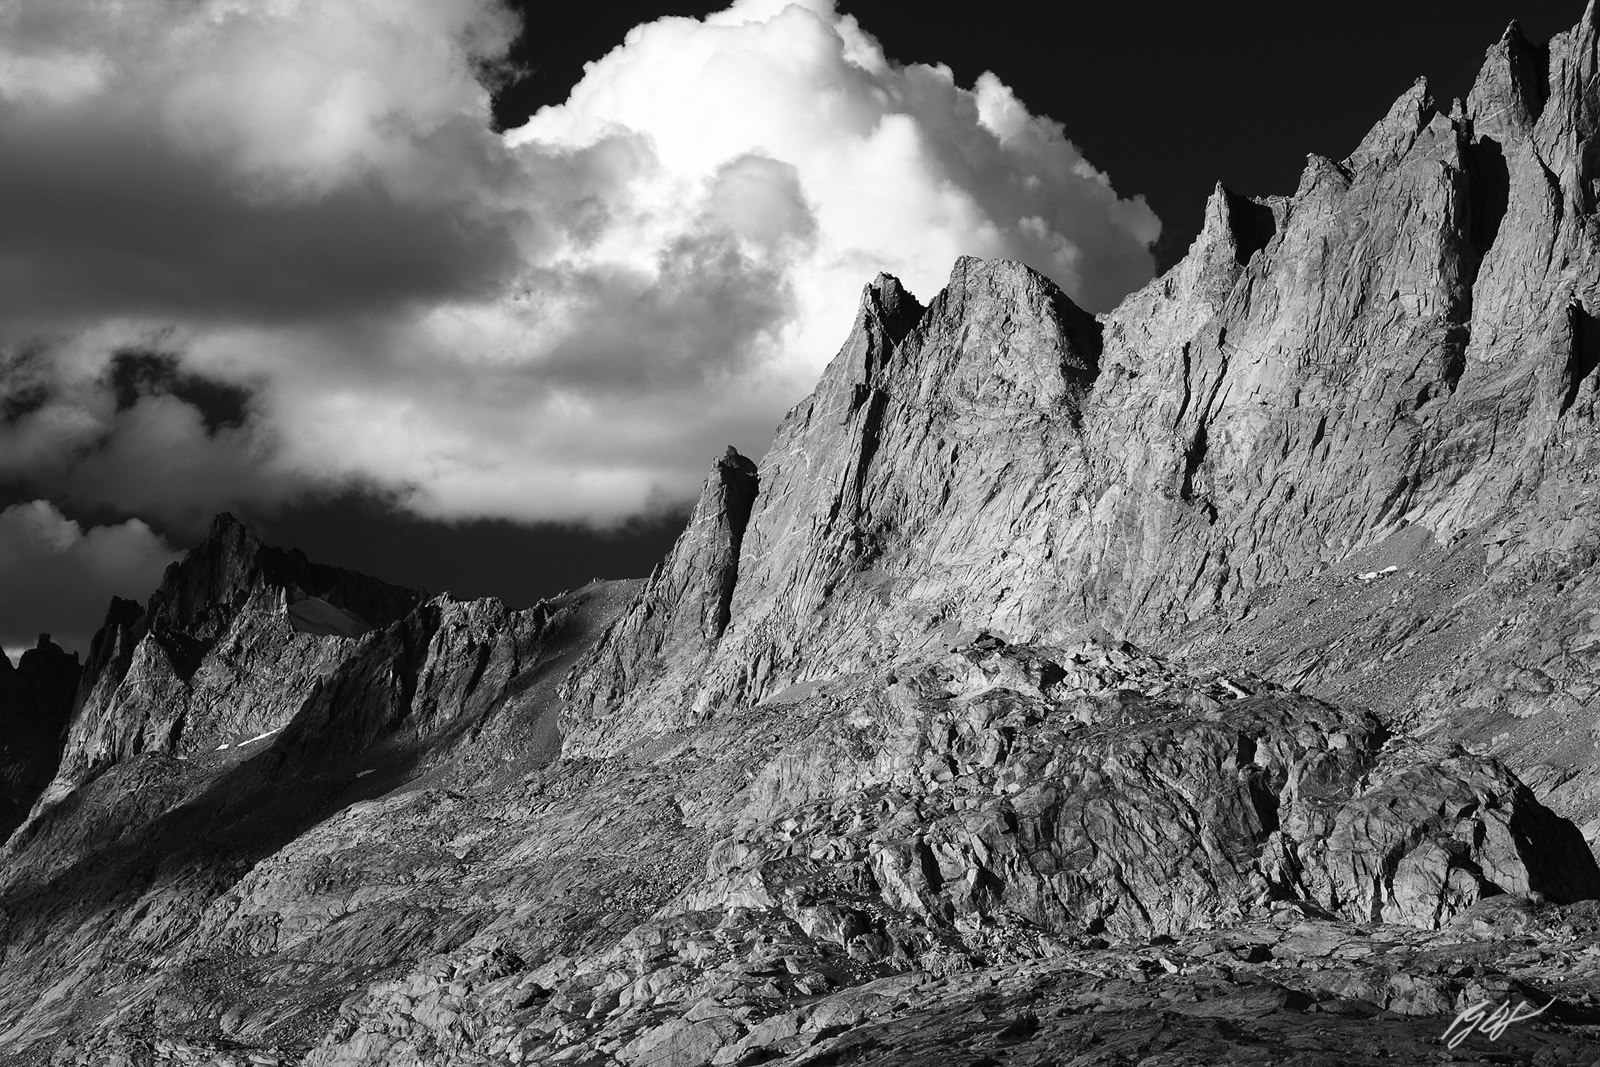 Clouds and Peak in the Titcomb Lakes Basin in the Wind River Range in Wyoming